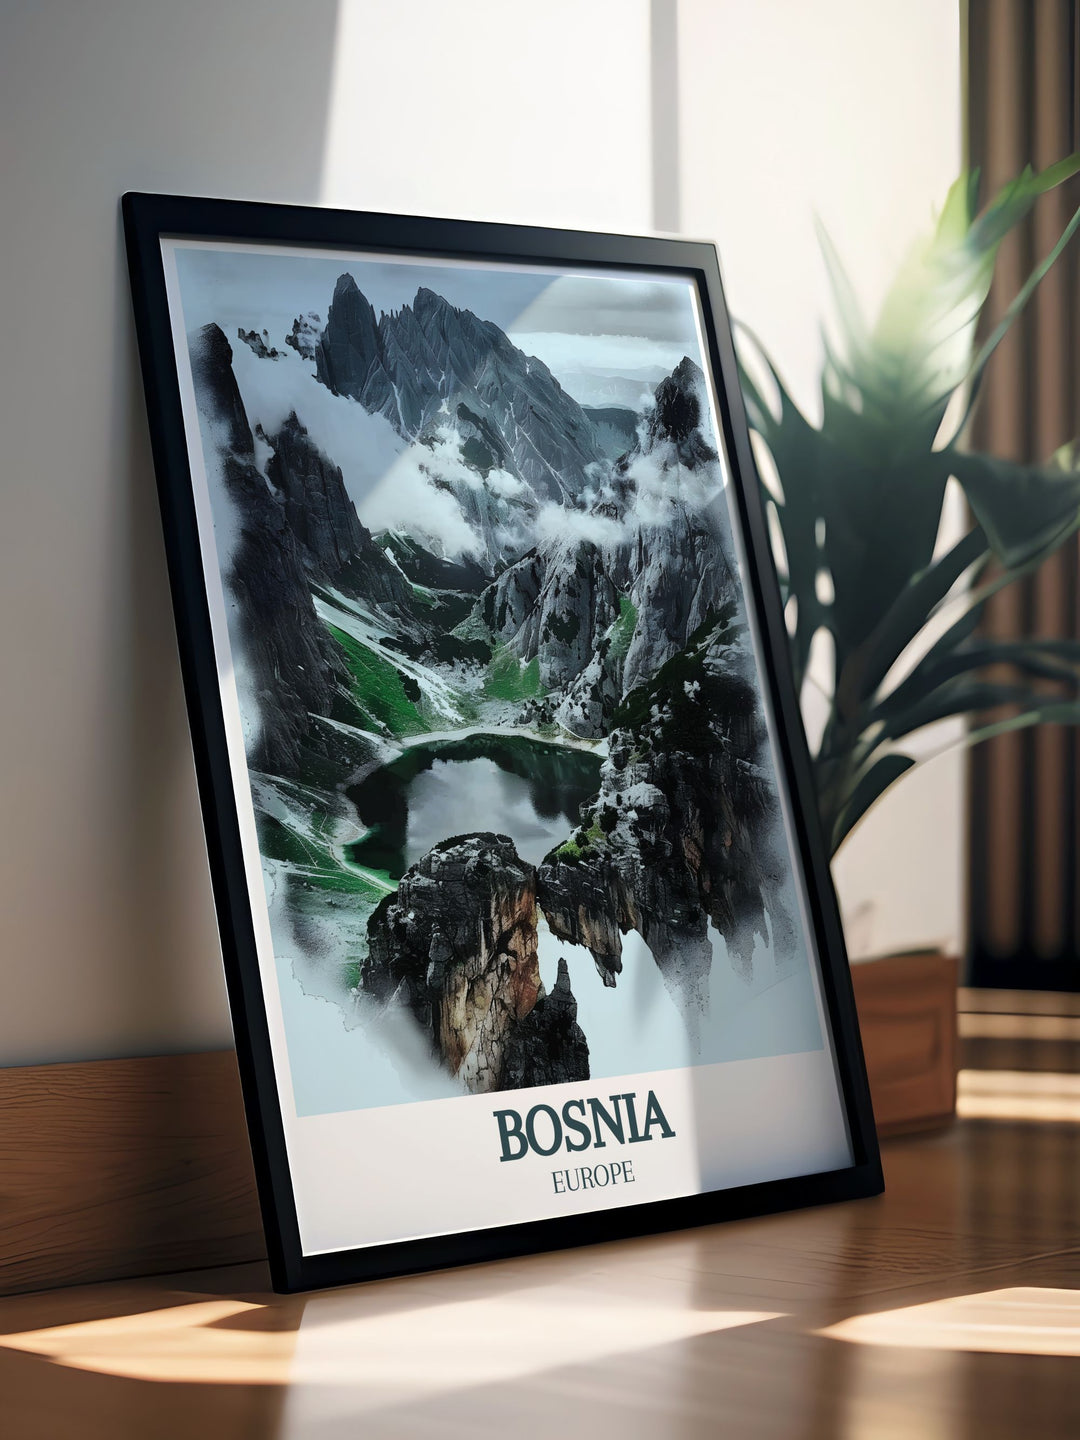 Sutjeska National Park, Maglić mountain, Trnovacko Lake in a stunning Bosnia Poster Print. This travel inspired artwork brings the beauty of Bosnia to life making it a perfect piece for those who love nature and outdoor adventures.